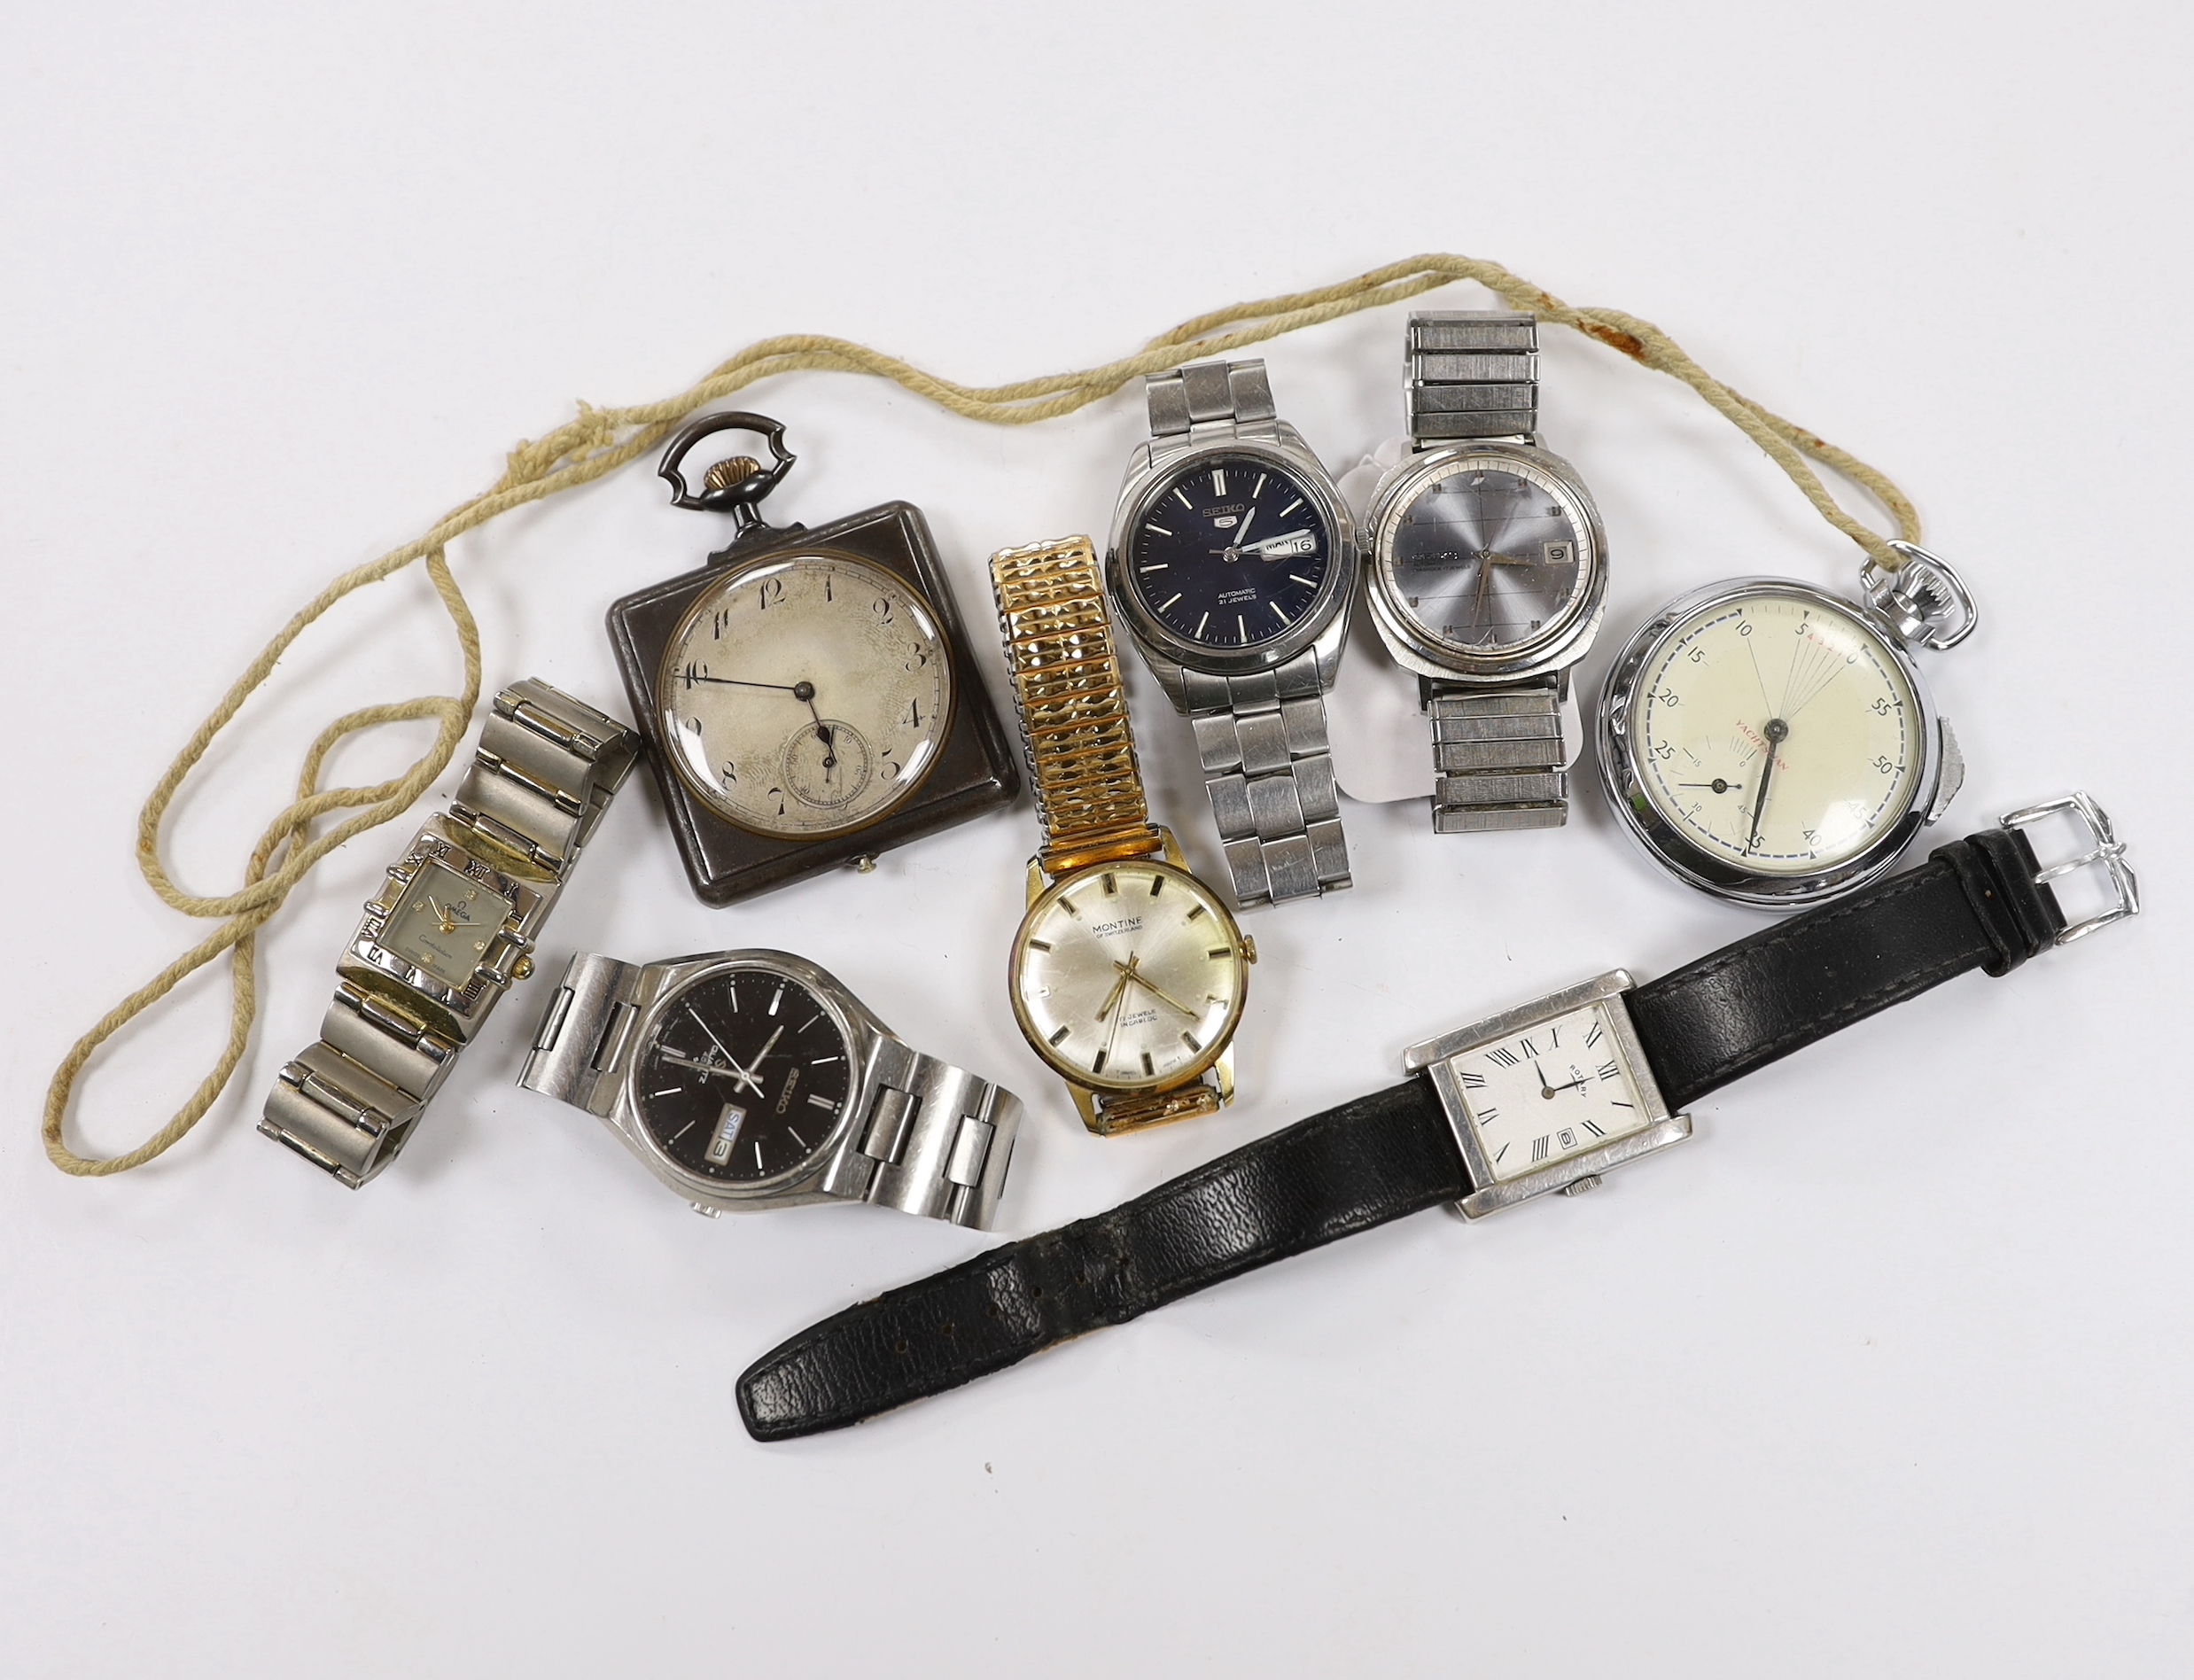 Six assorted gentleman's wrist watches including a Seiko Diashock automatic, two other Seiko watches and a sterling Rotary watch, together with a gun metal travelling timepiece and a 'Yachtsman' stop watch.